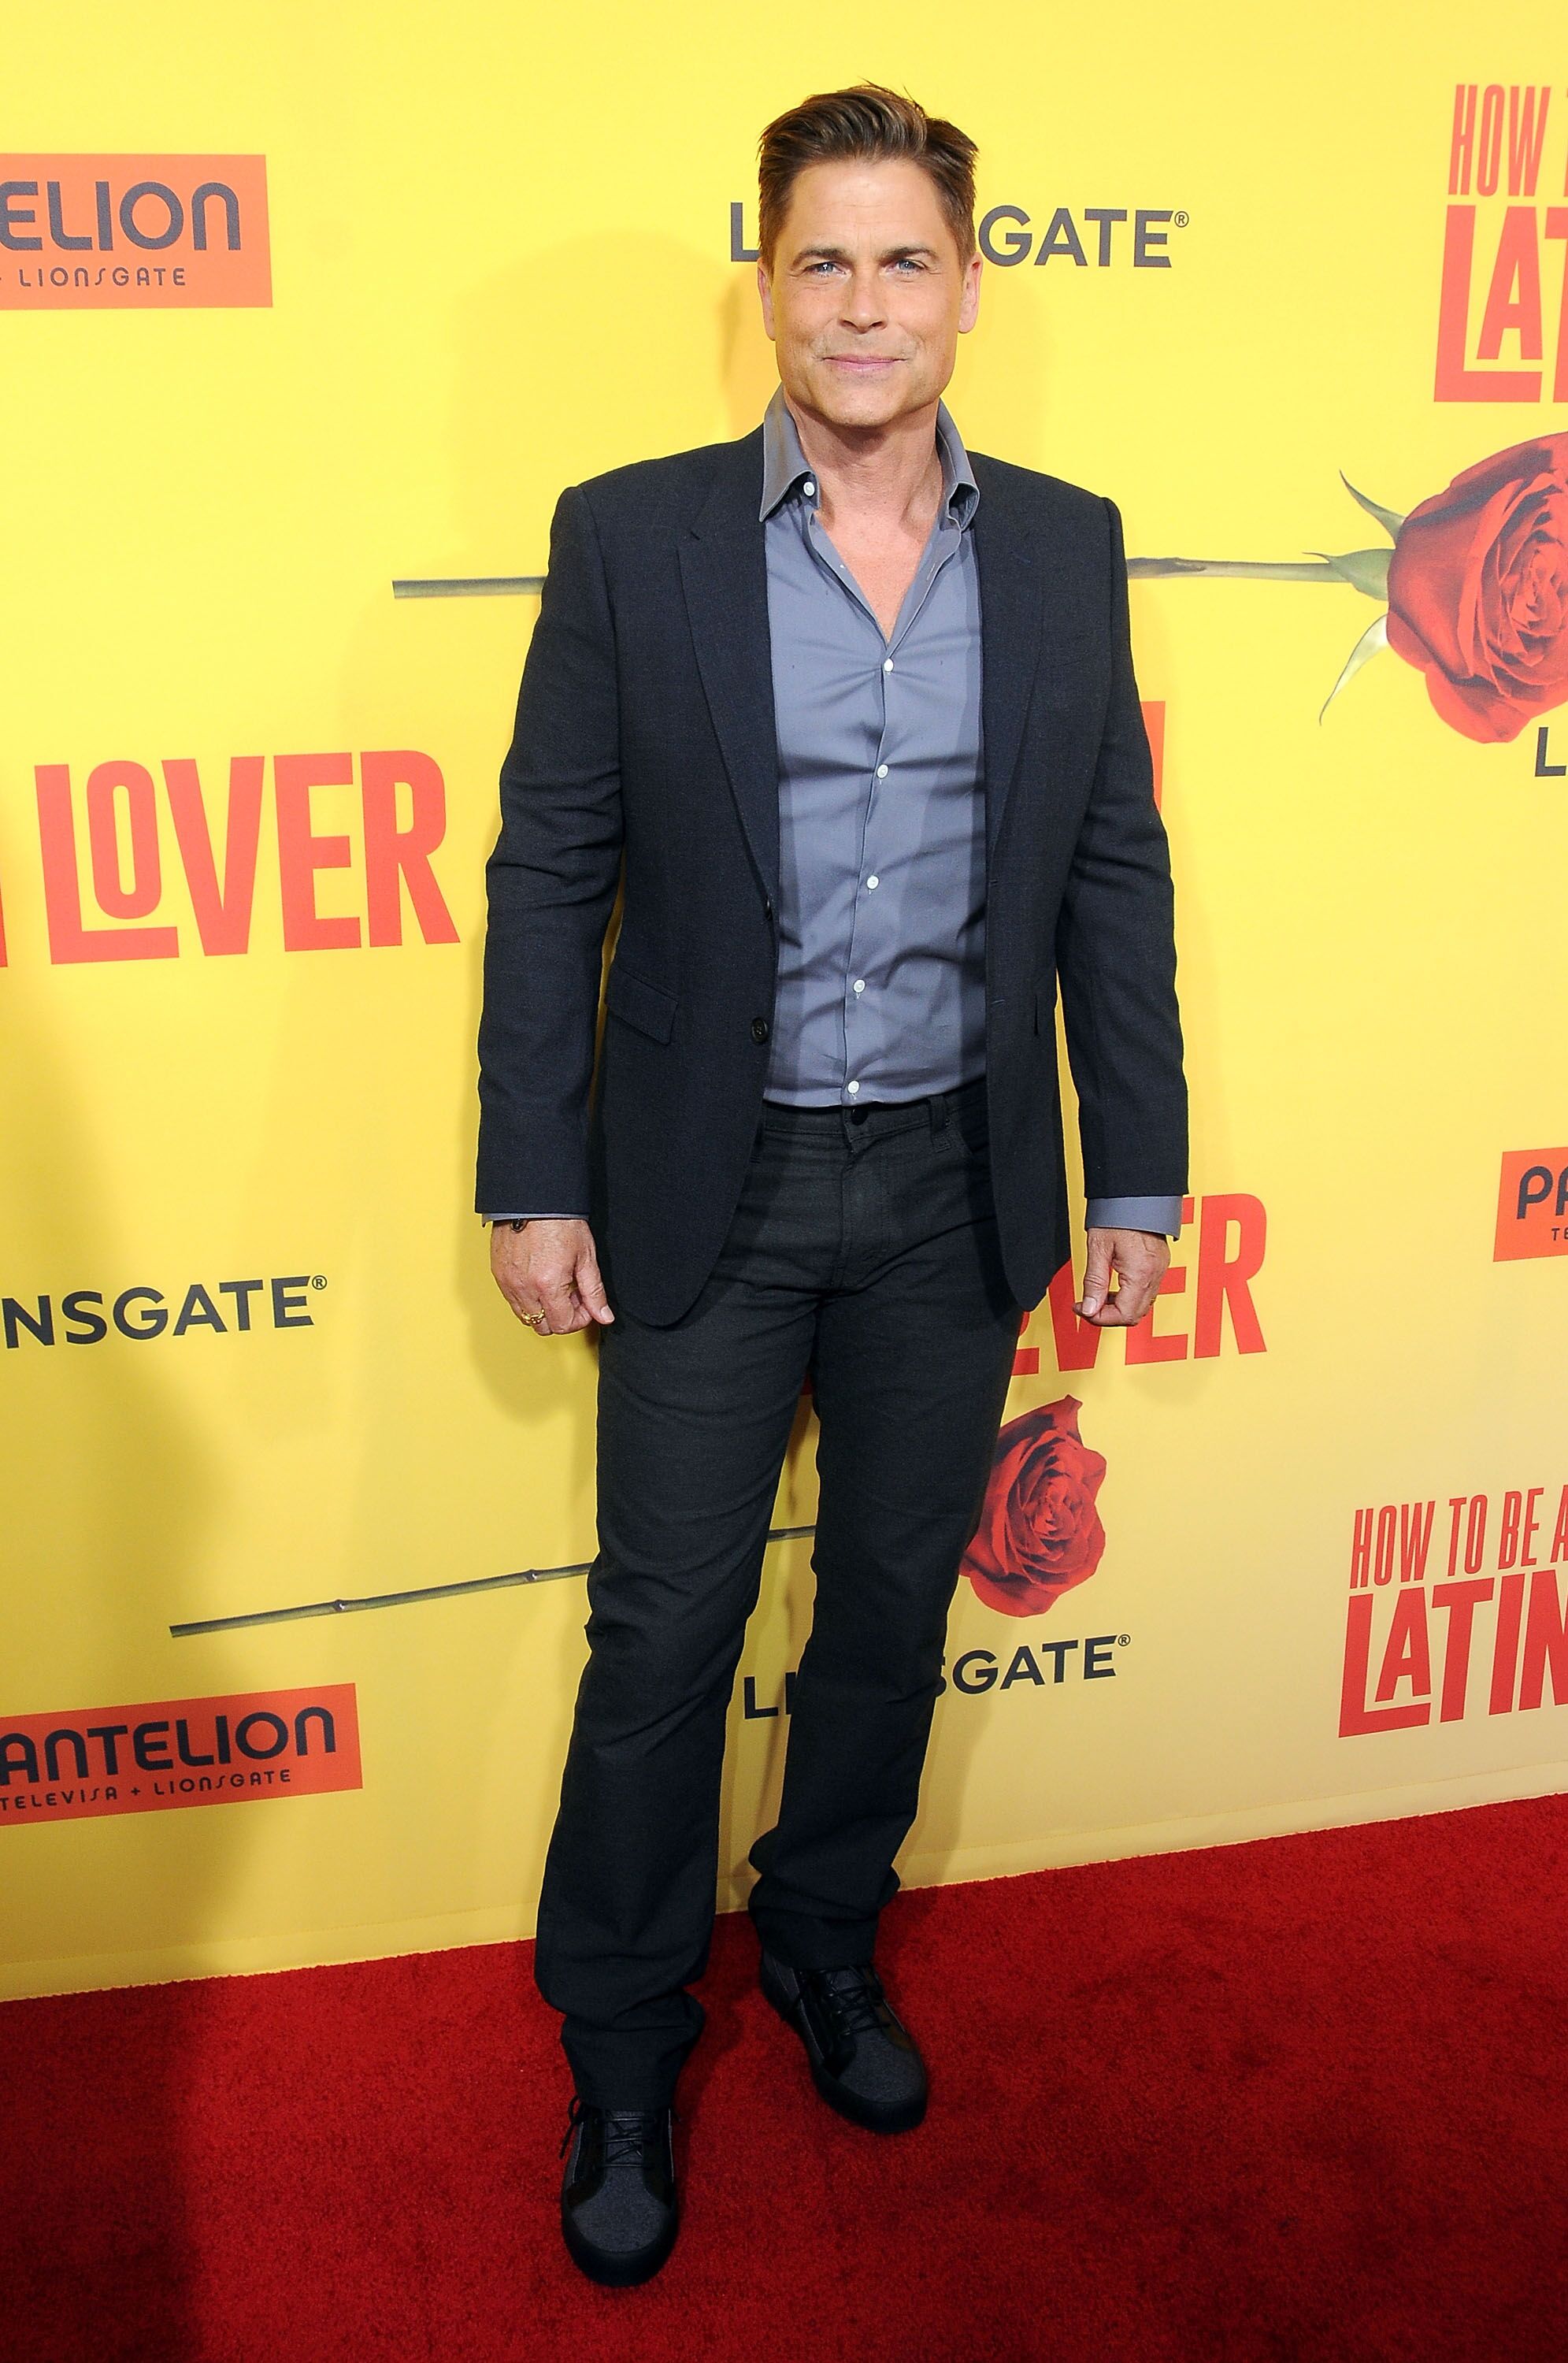 Rob Lowe attends the premiere of Pantelion Films' 'How To Be A Latin Lover' attends on April 26, 2017 in Hollywood, California. | Source: Getty Images